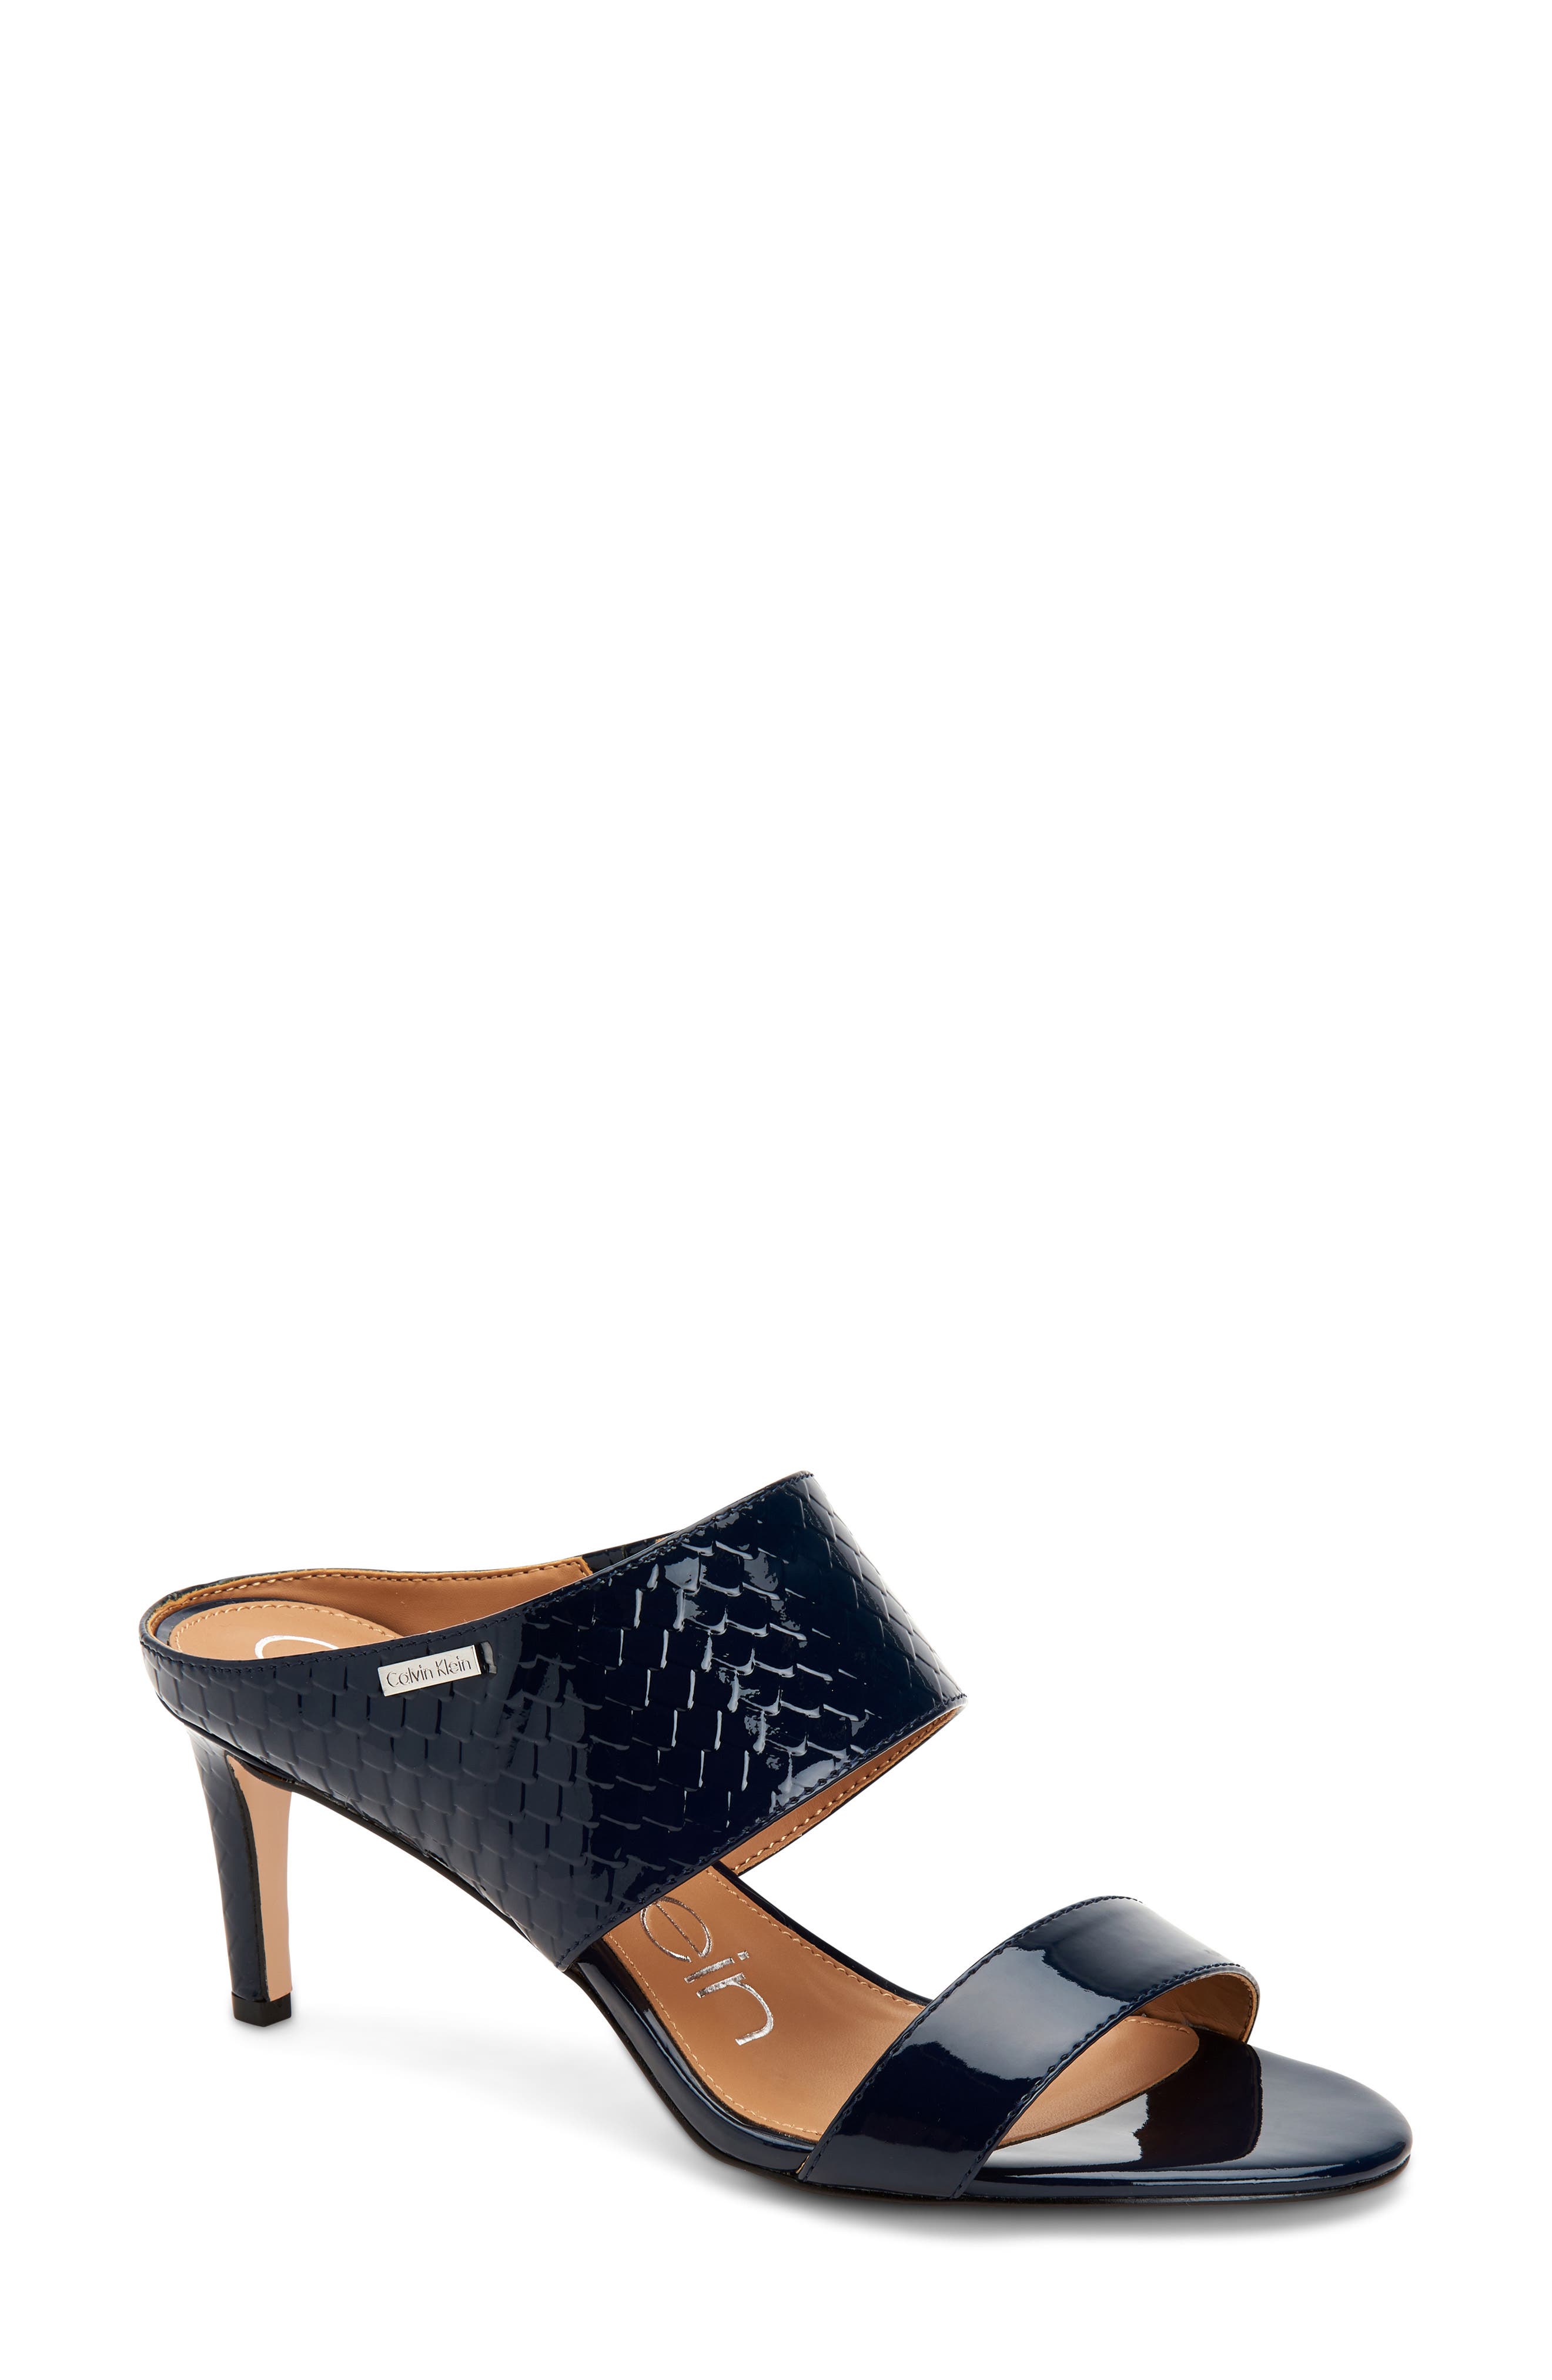 Cecily Patent Python Embossed Sandal 